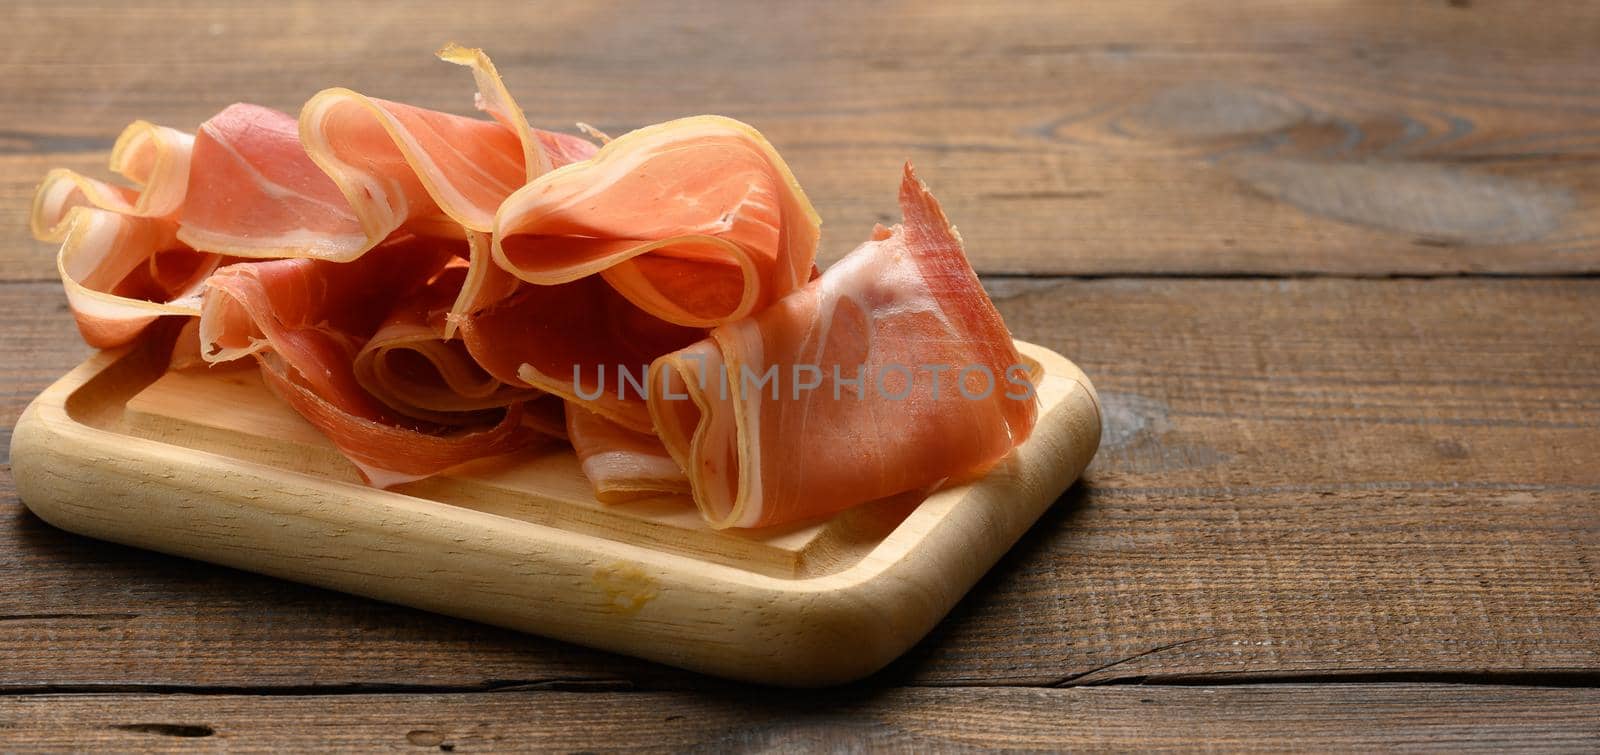 sliced thin slices of prosciutto on wooden brown board, wooden table background